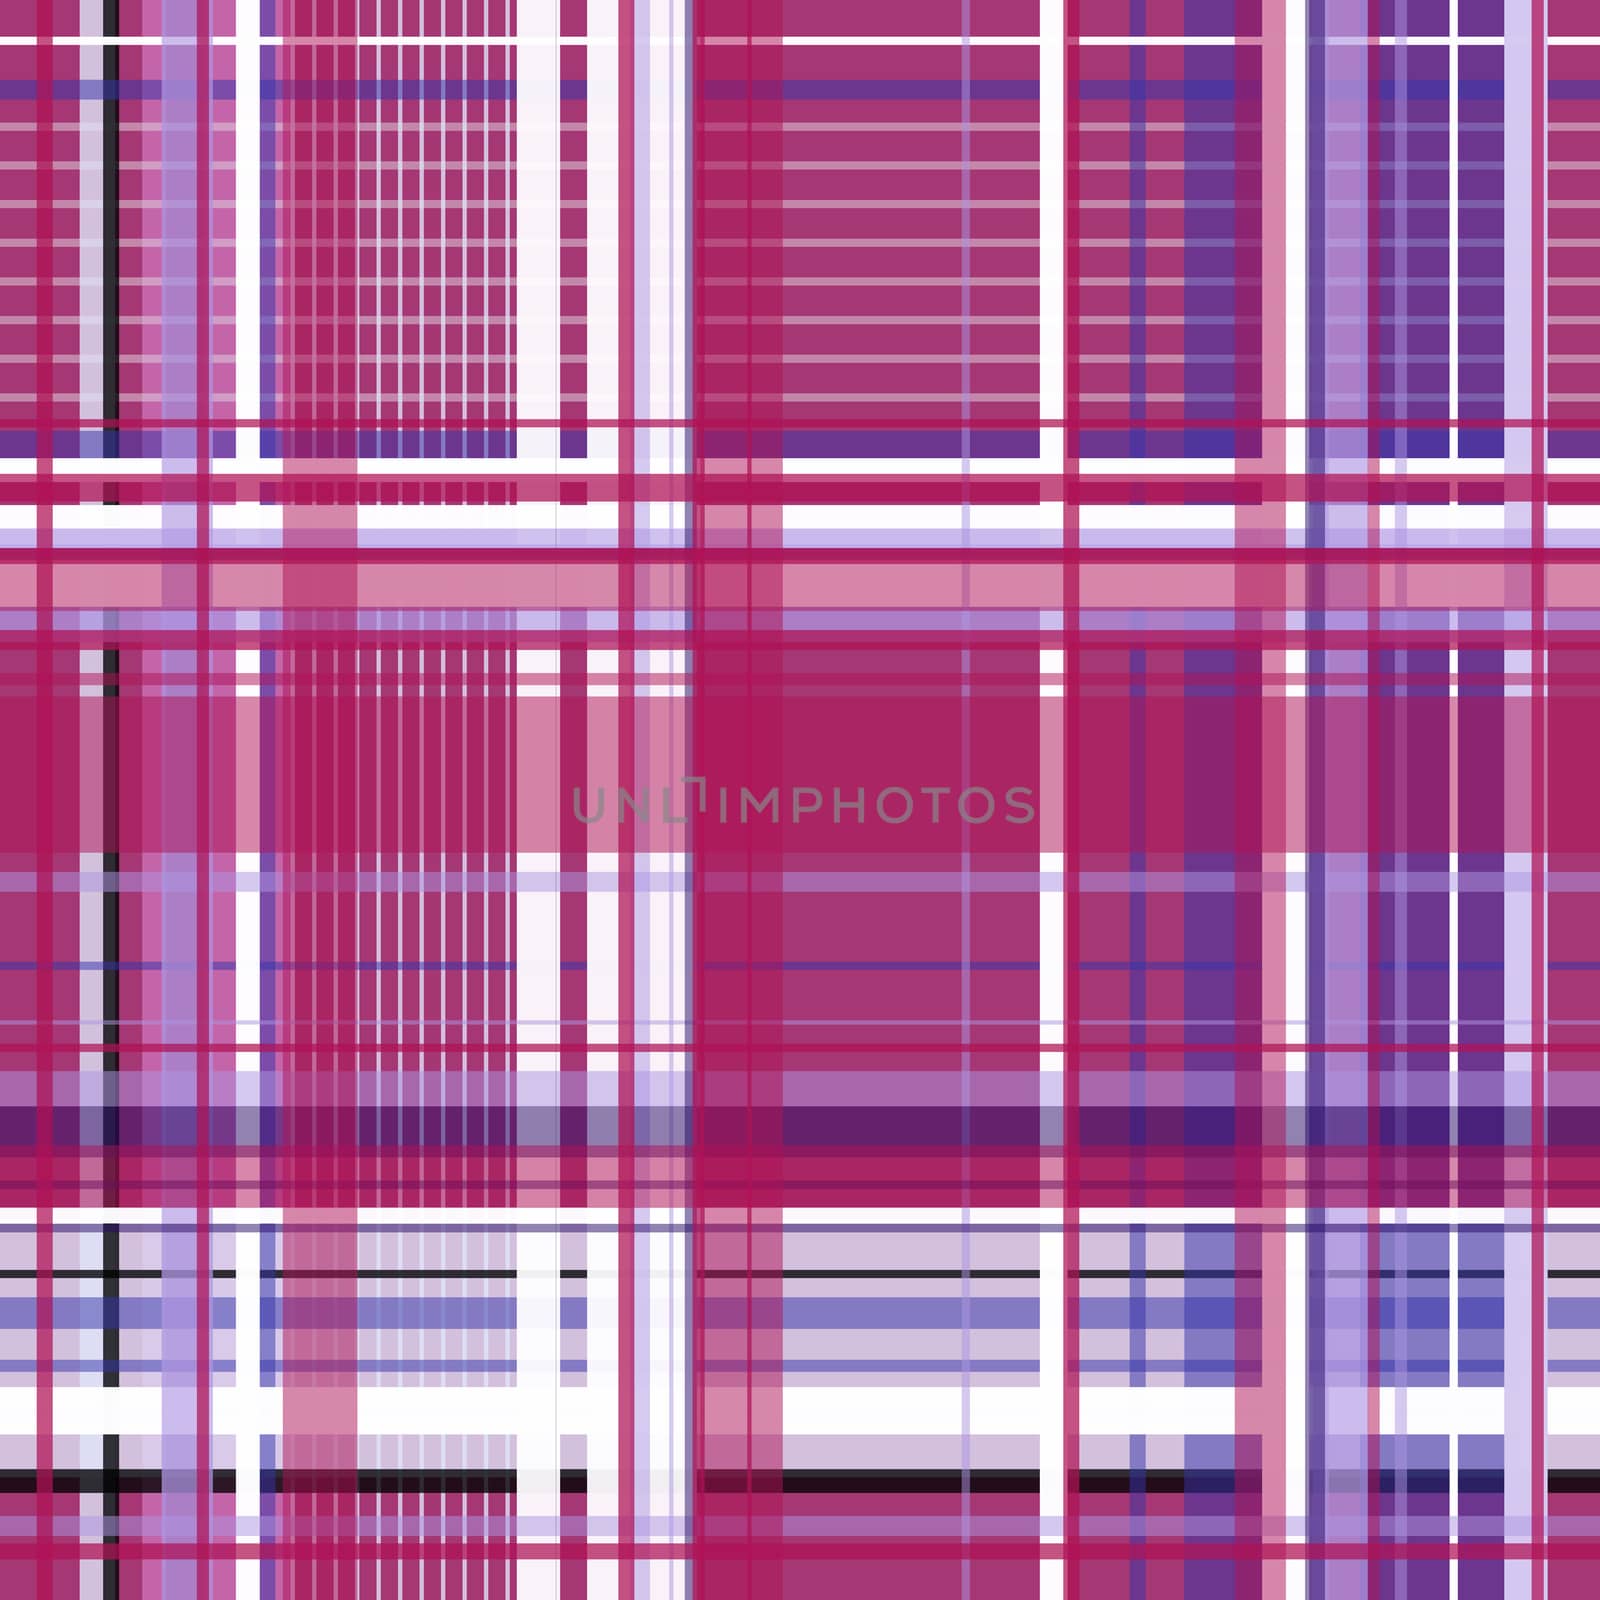 Plaid burgundy, white and blue, seamless tileable digital graphic